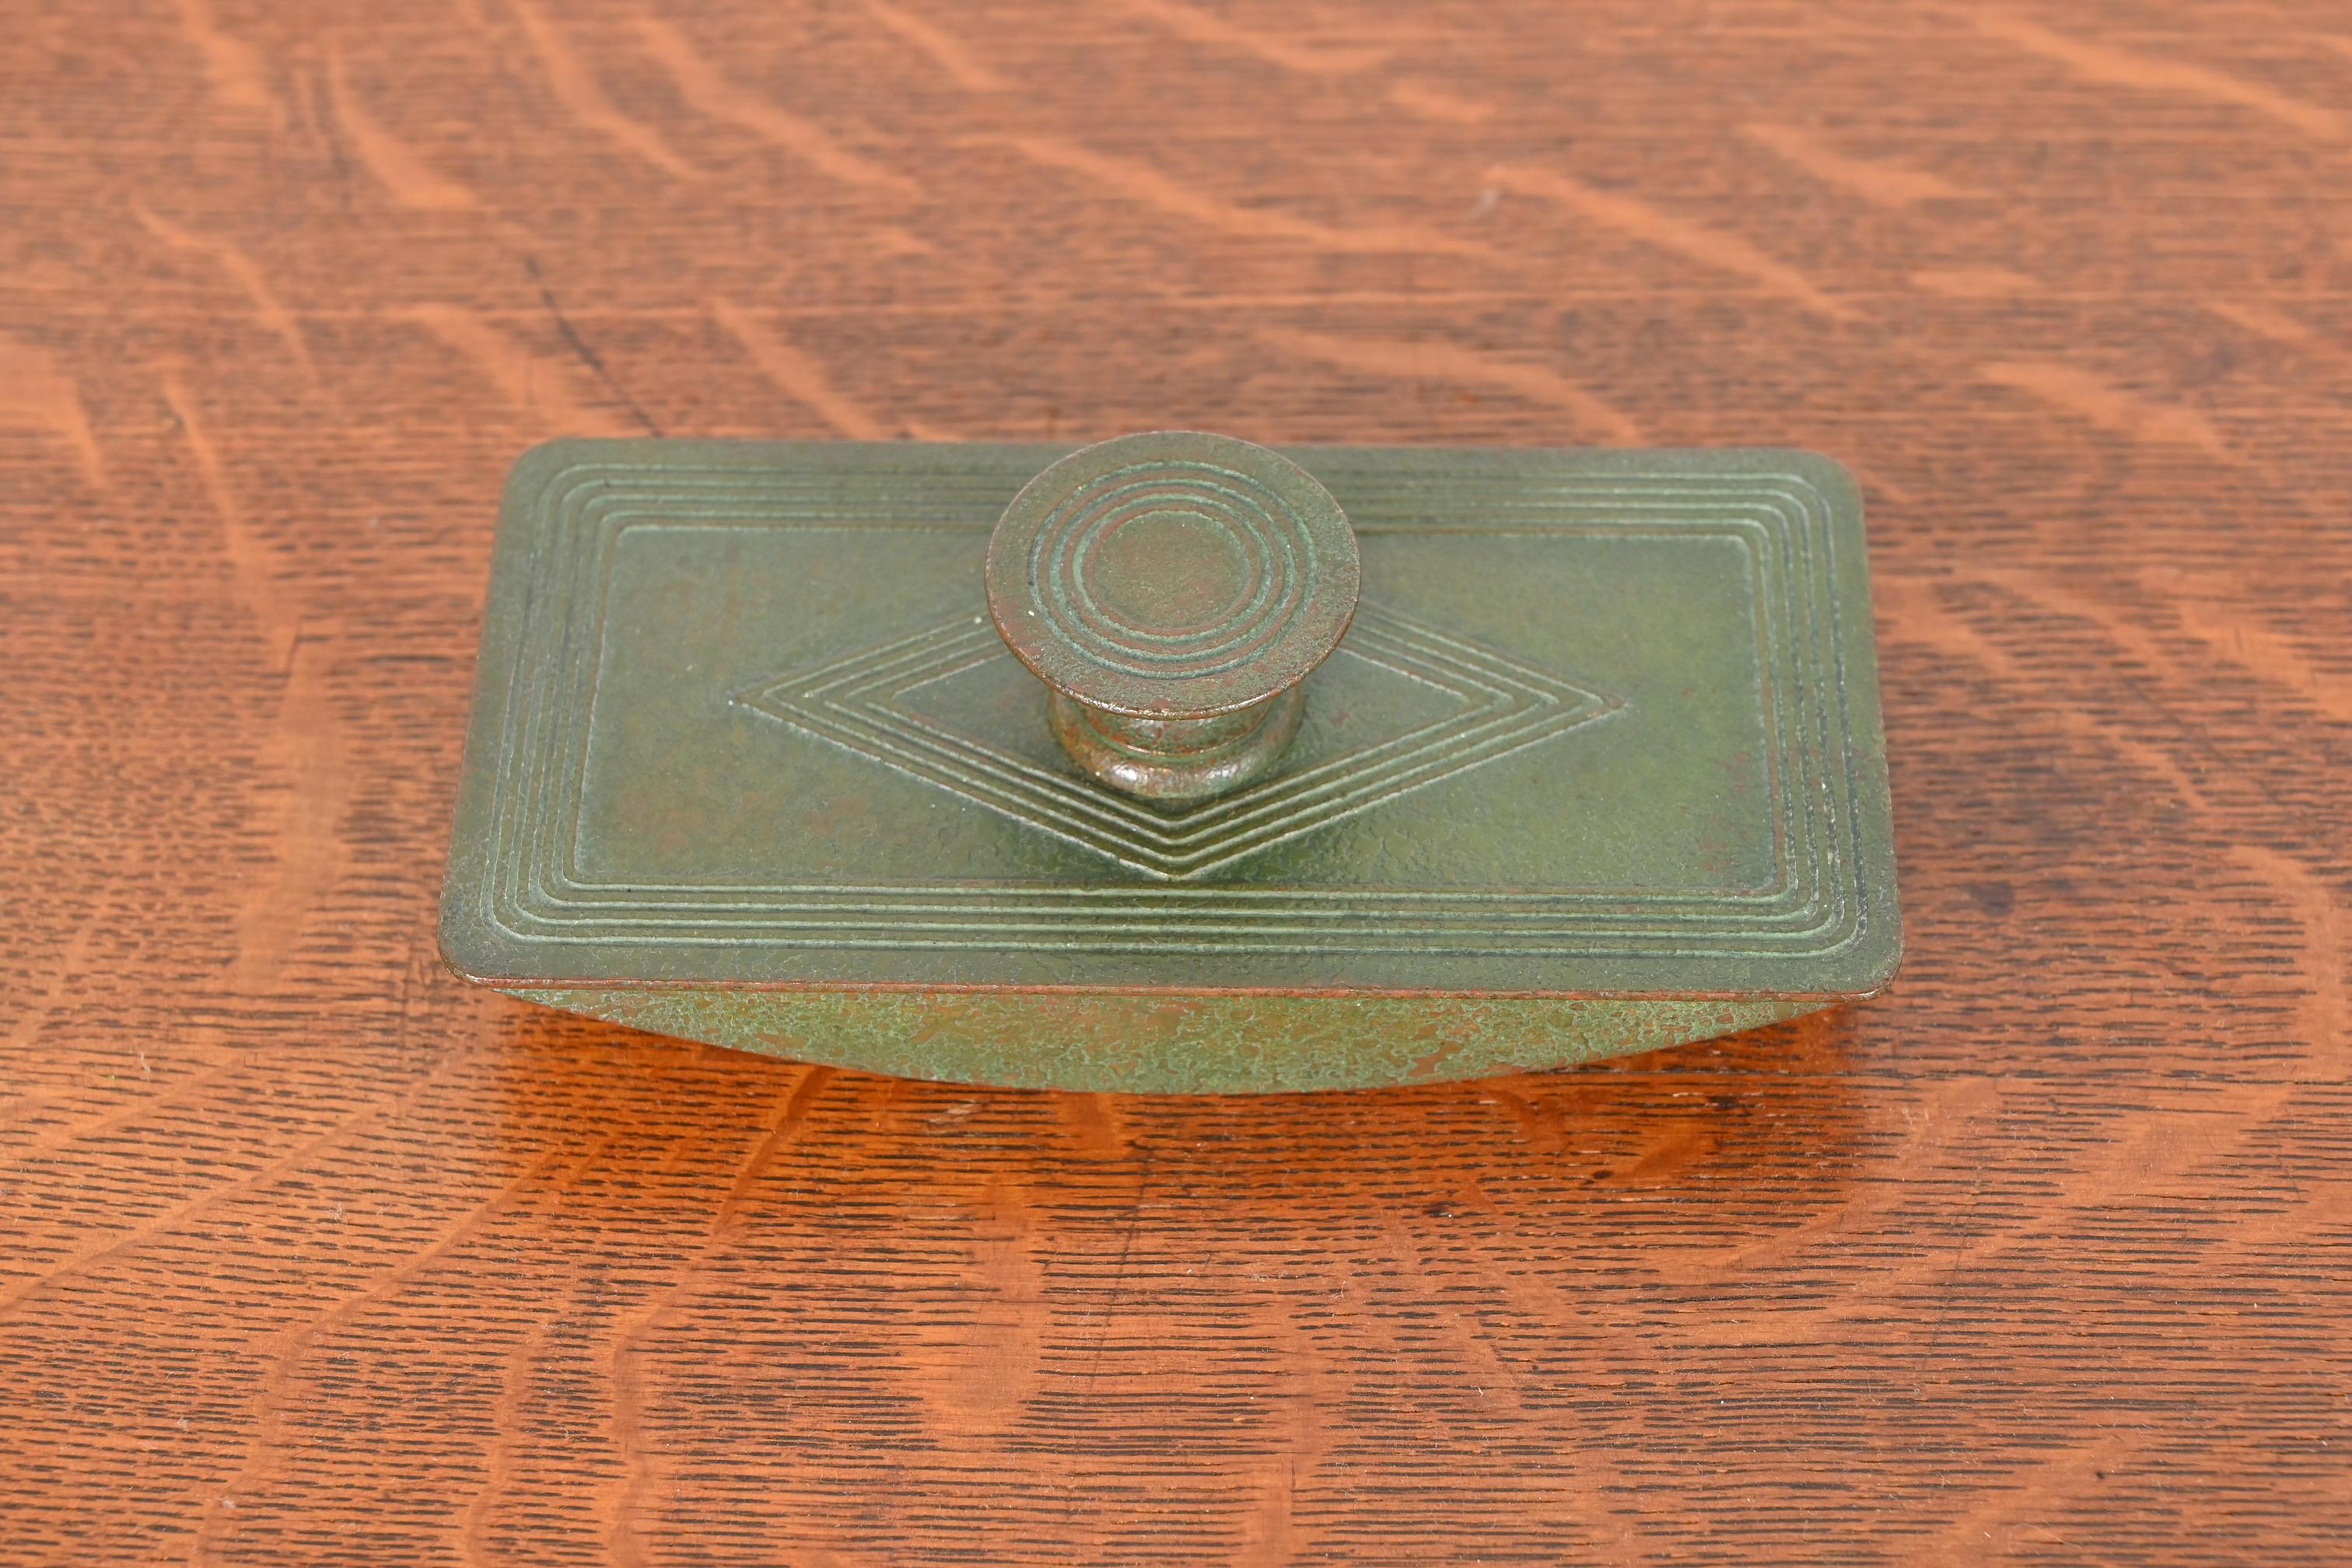 A gorgeous antique bronze rocker ink blotter featuring the iconic Graduate pattern in verdigris green patina

By Tiffany Studios (signed to the side)

New York, USA, Early 20th Century

Measures: 5.75